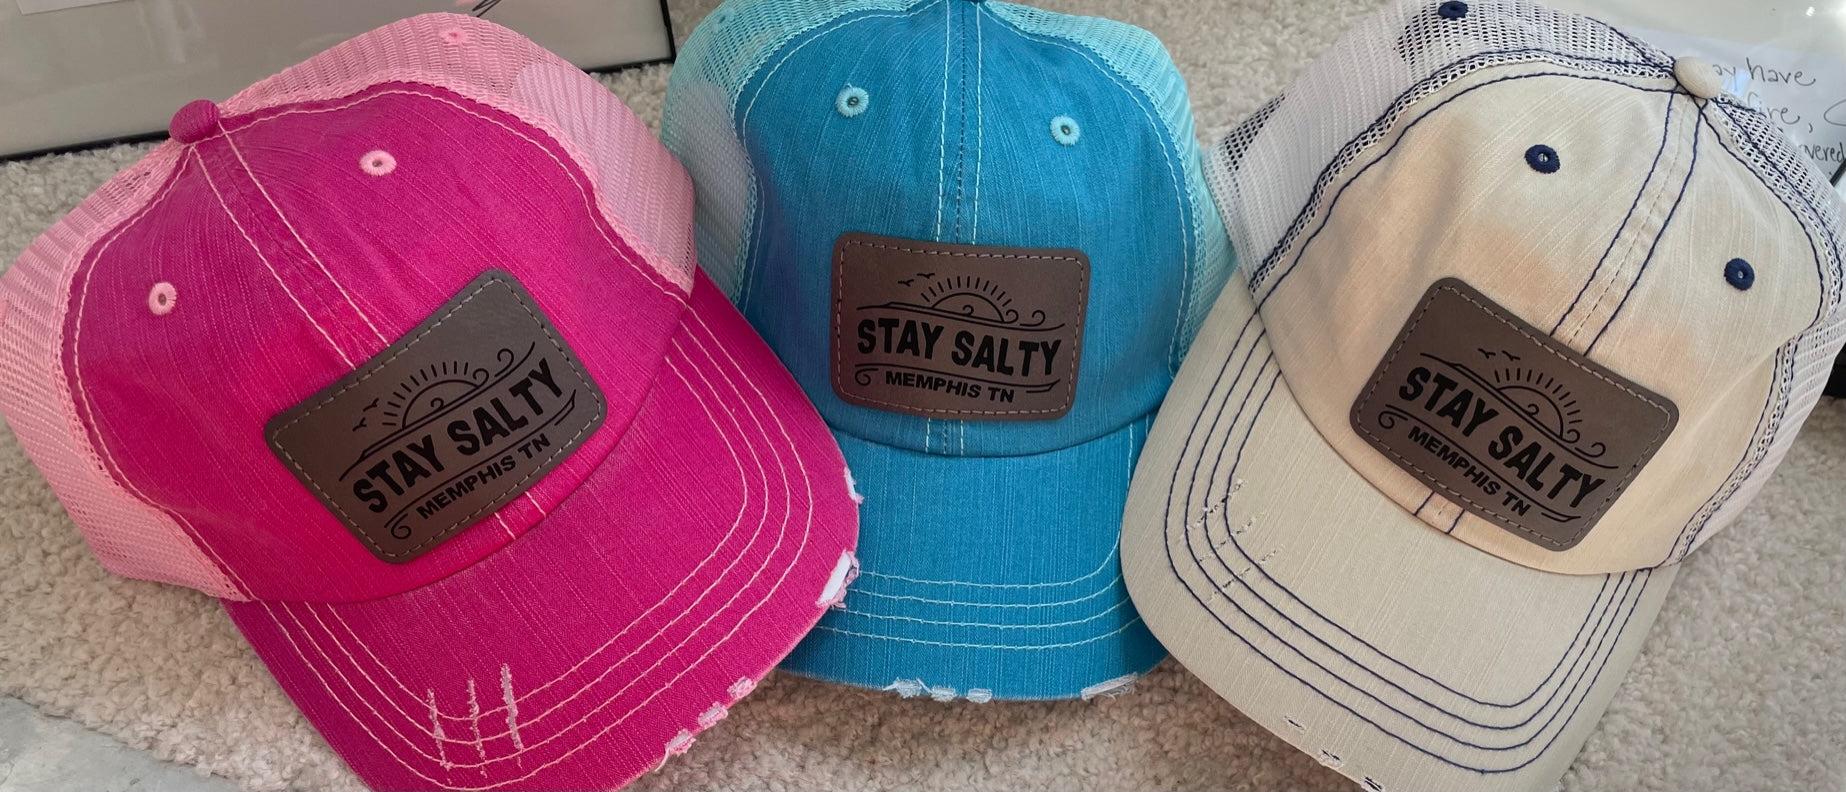 HATS  Memphis TN Stay Salty Leatherette Patch Engraved Trucker Hat